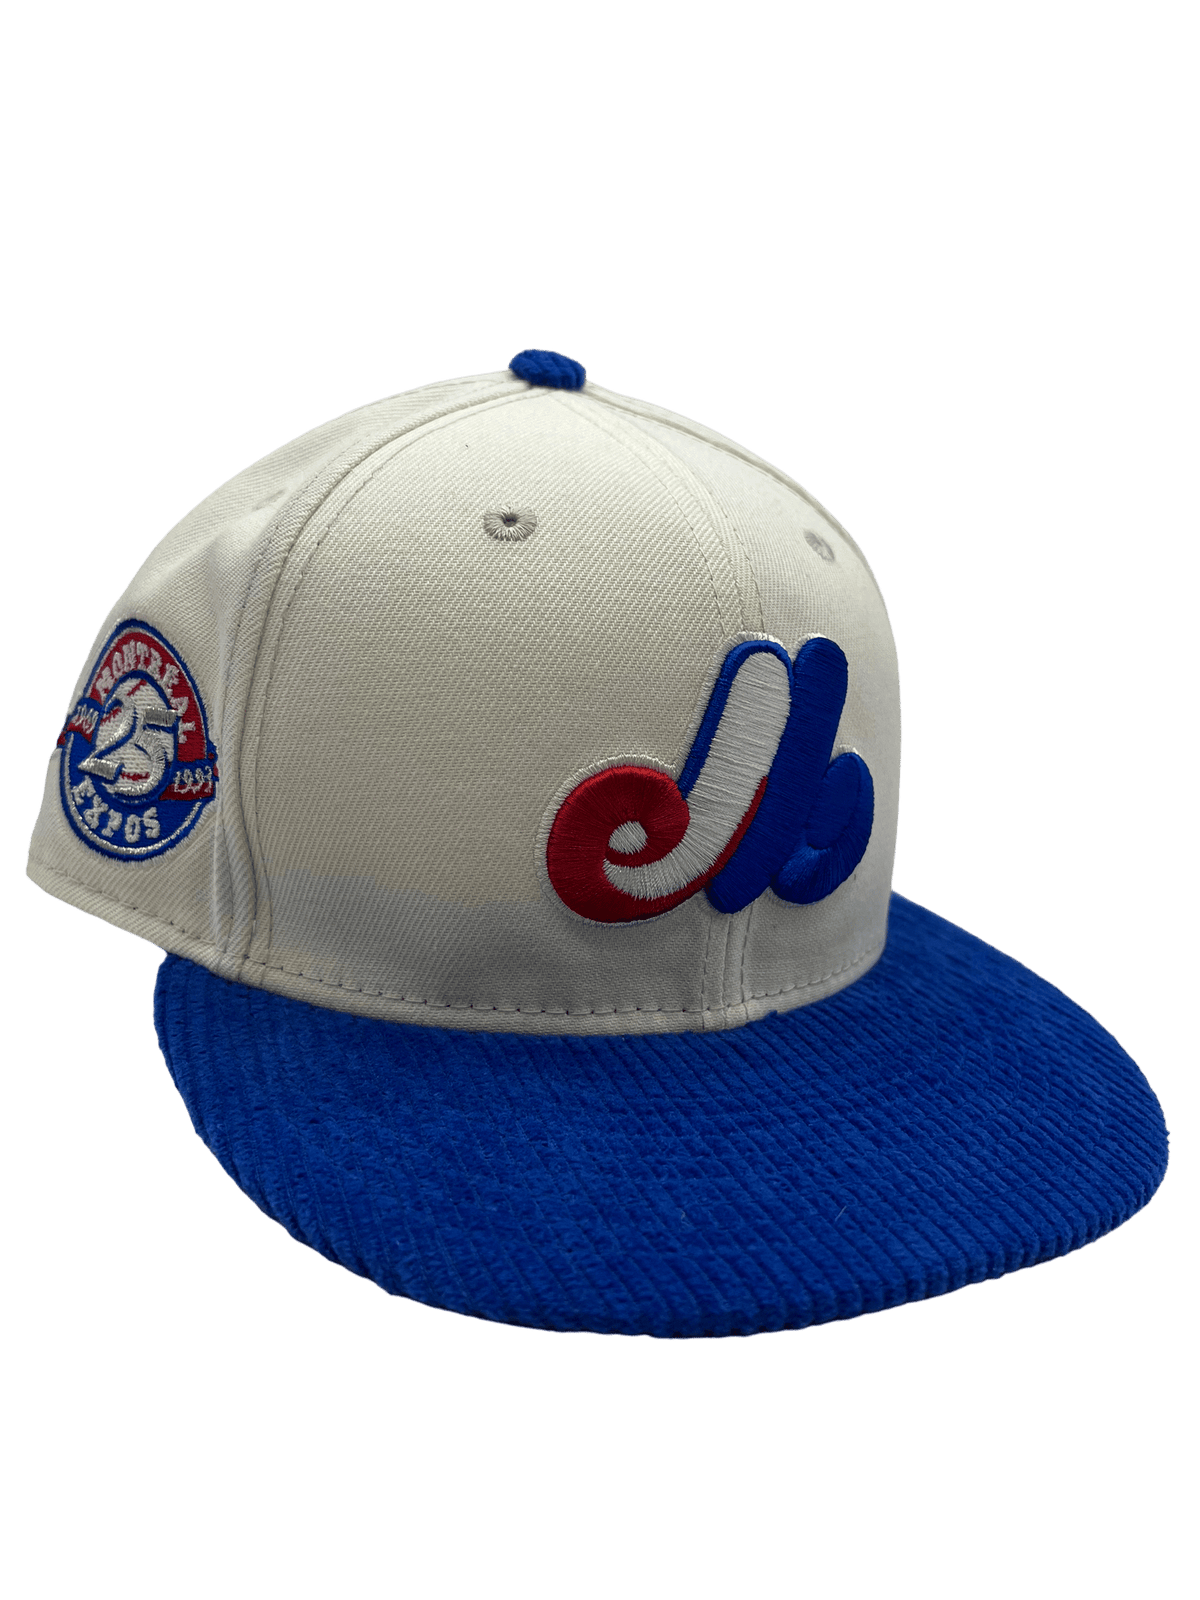 Actual Vintage Montreal Expos Jersey by Ravens Knit Size 